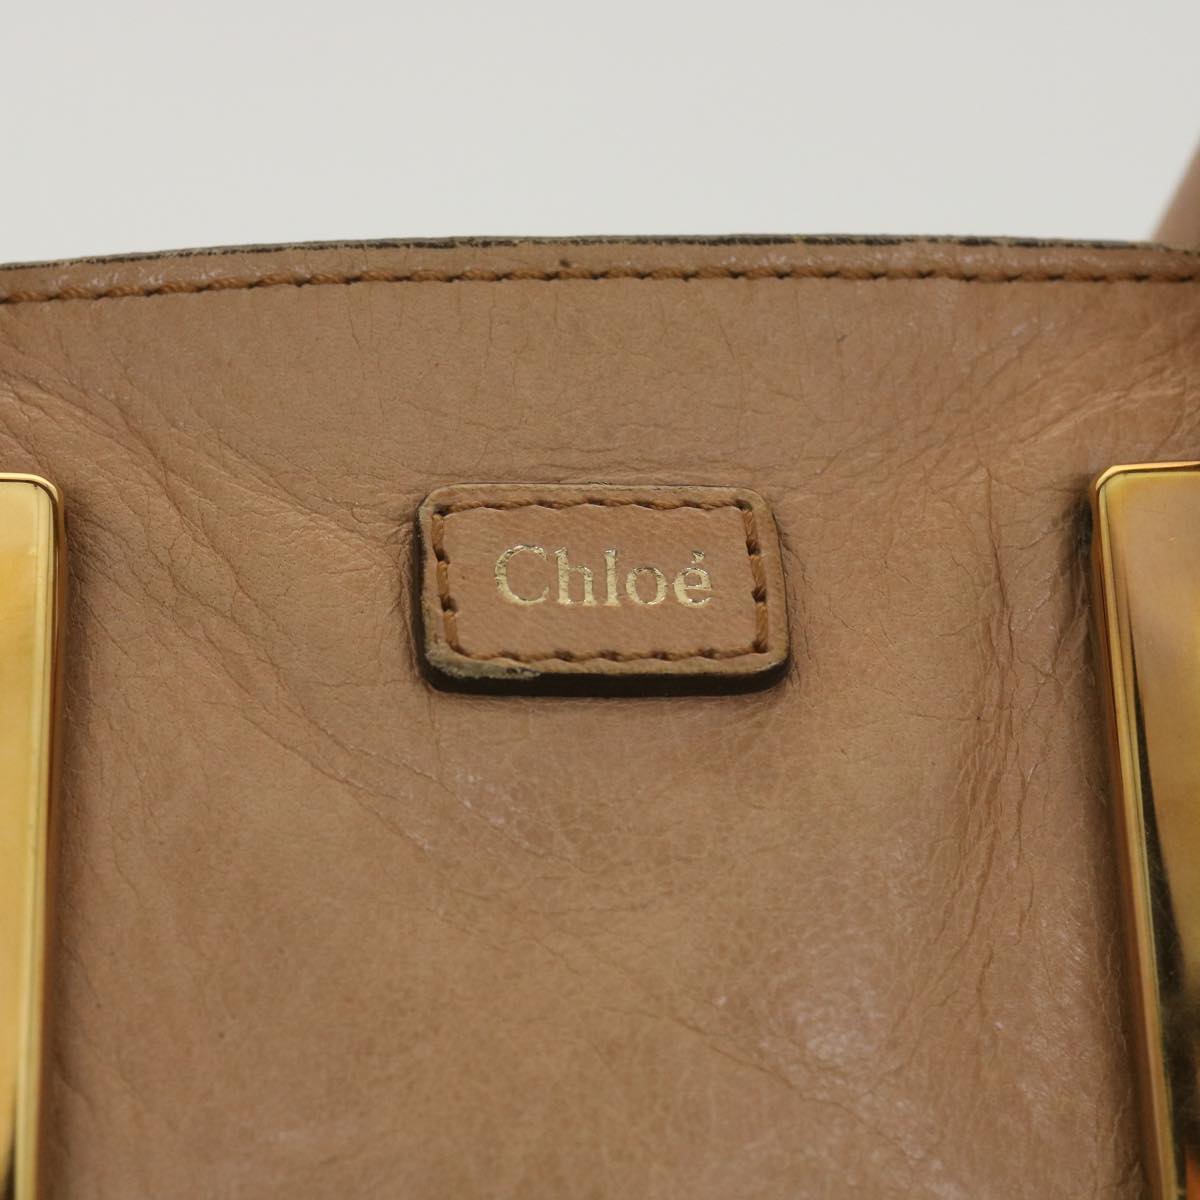 Chloe Hand Bag Leather 2way Pink 03-11-50 Auth 37836